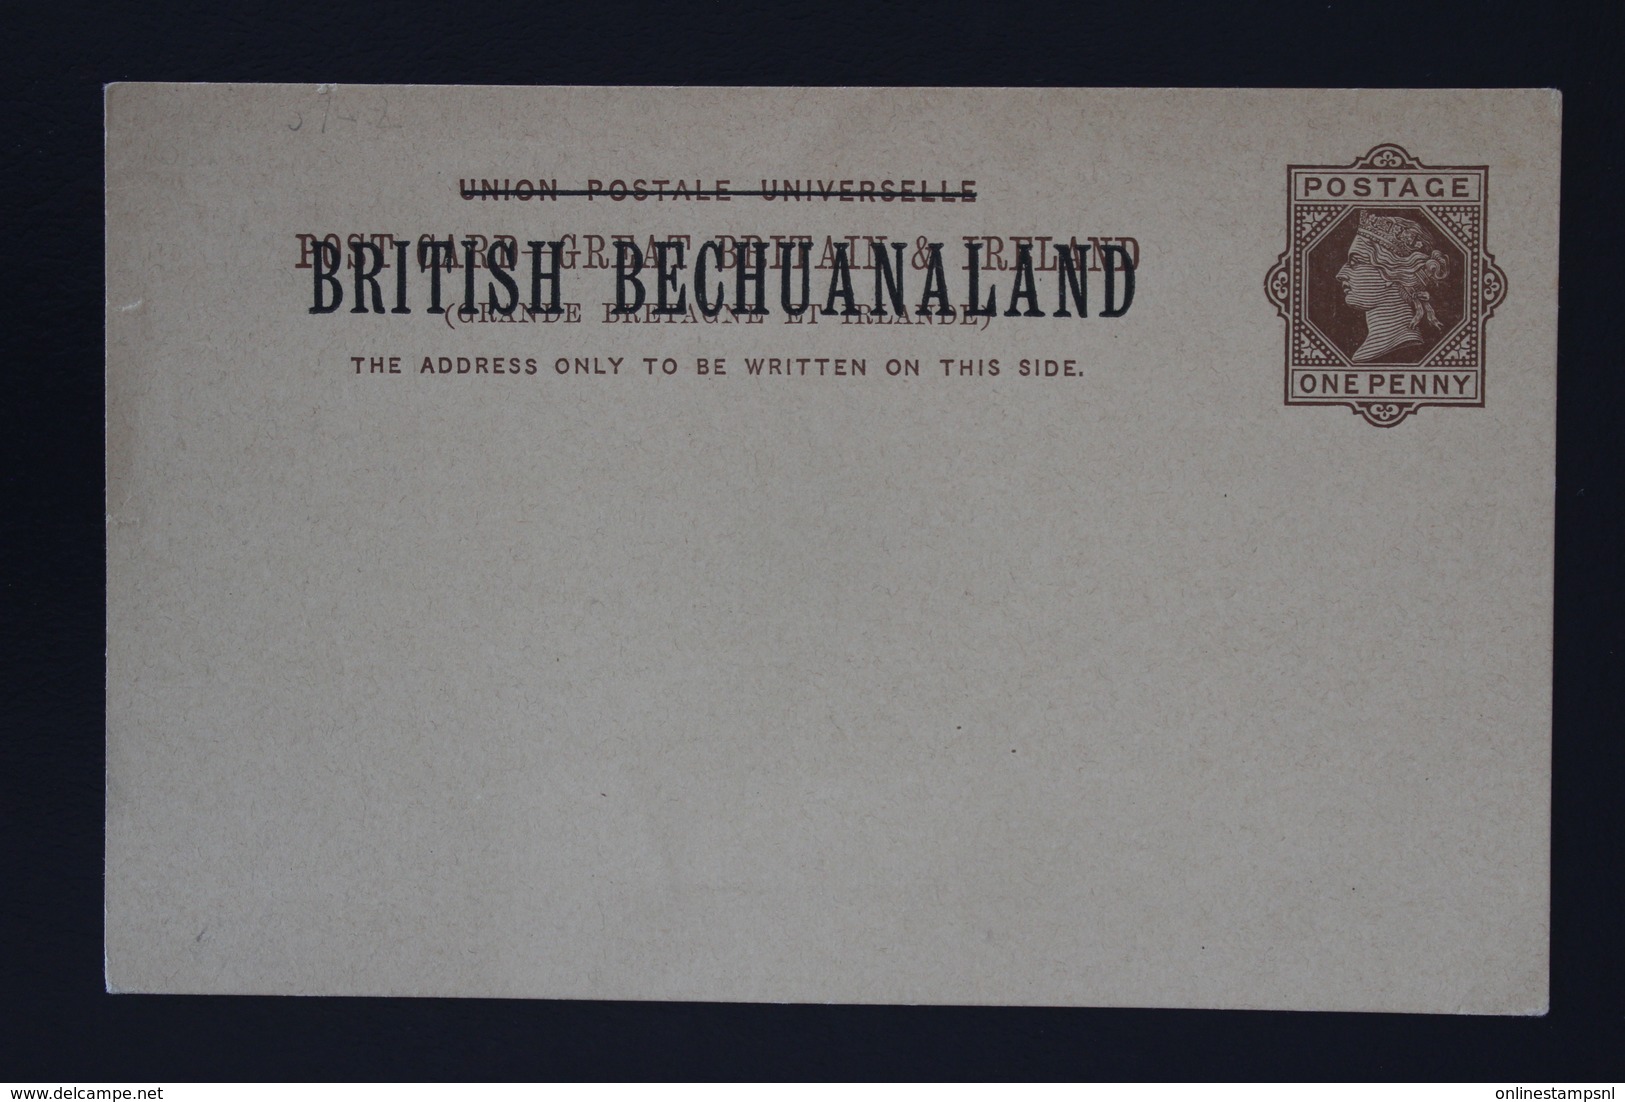 BRITISH BECHUANALAND  Postcard Used + Unused HG P4 1894 Cancel 555 Vryburg + CDS -> Cape Town - 1885-1895 Colonia Britannica